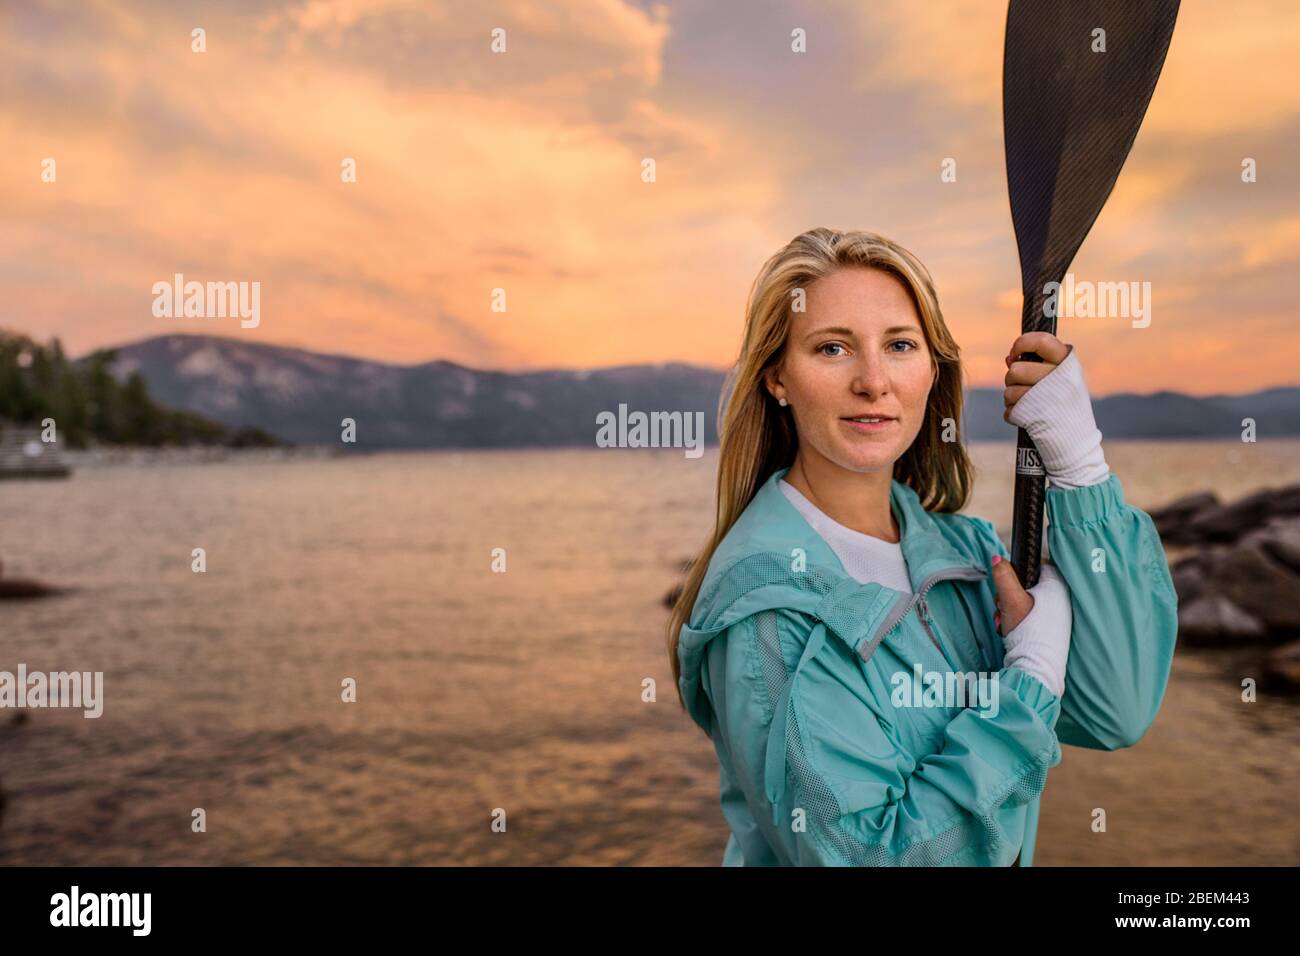 Mid adult woman standing by a lake at sunset holding a paddle Stock Photo